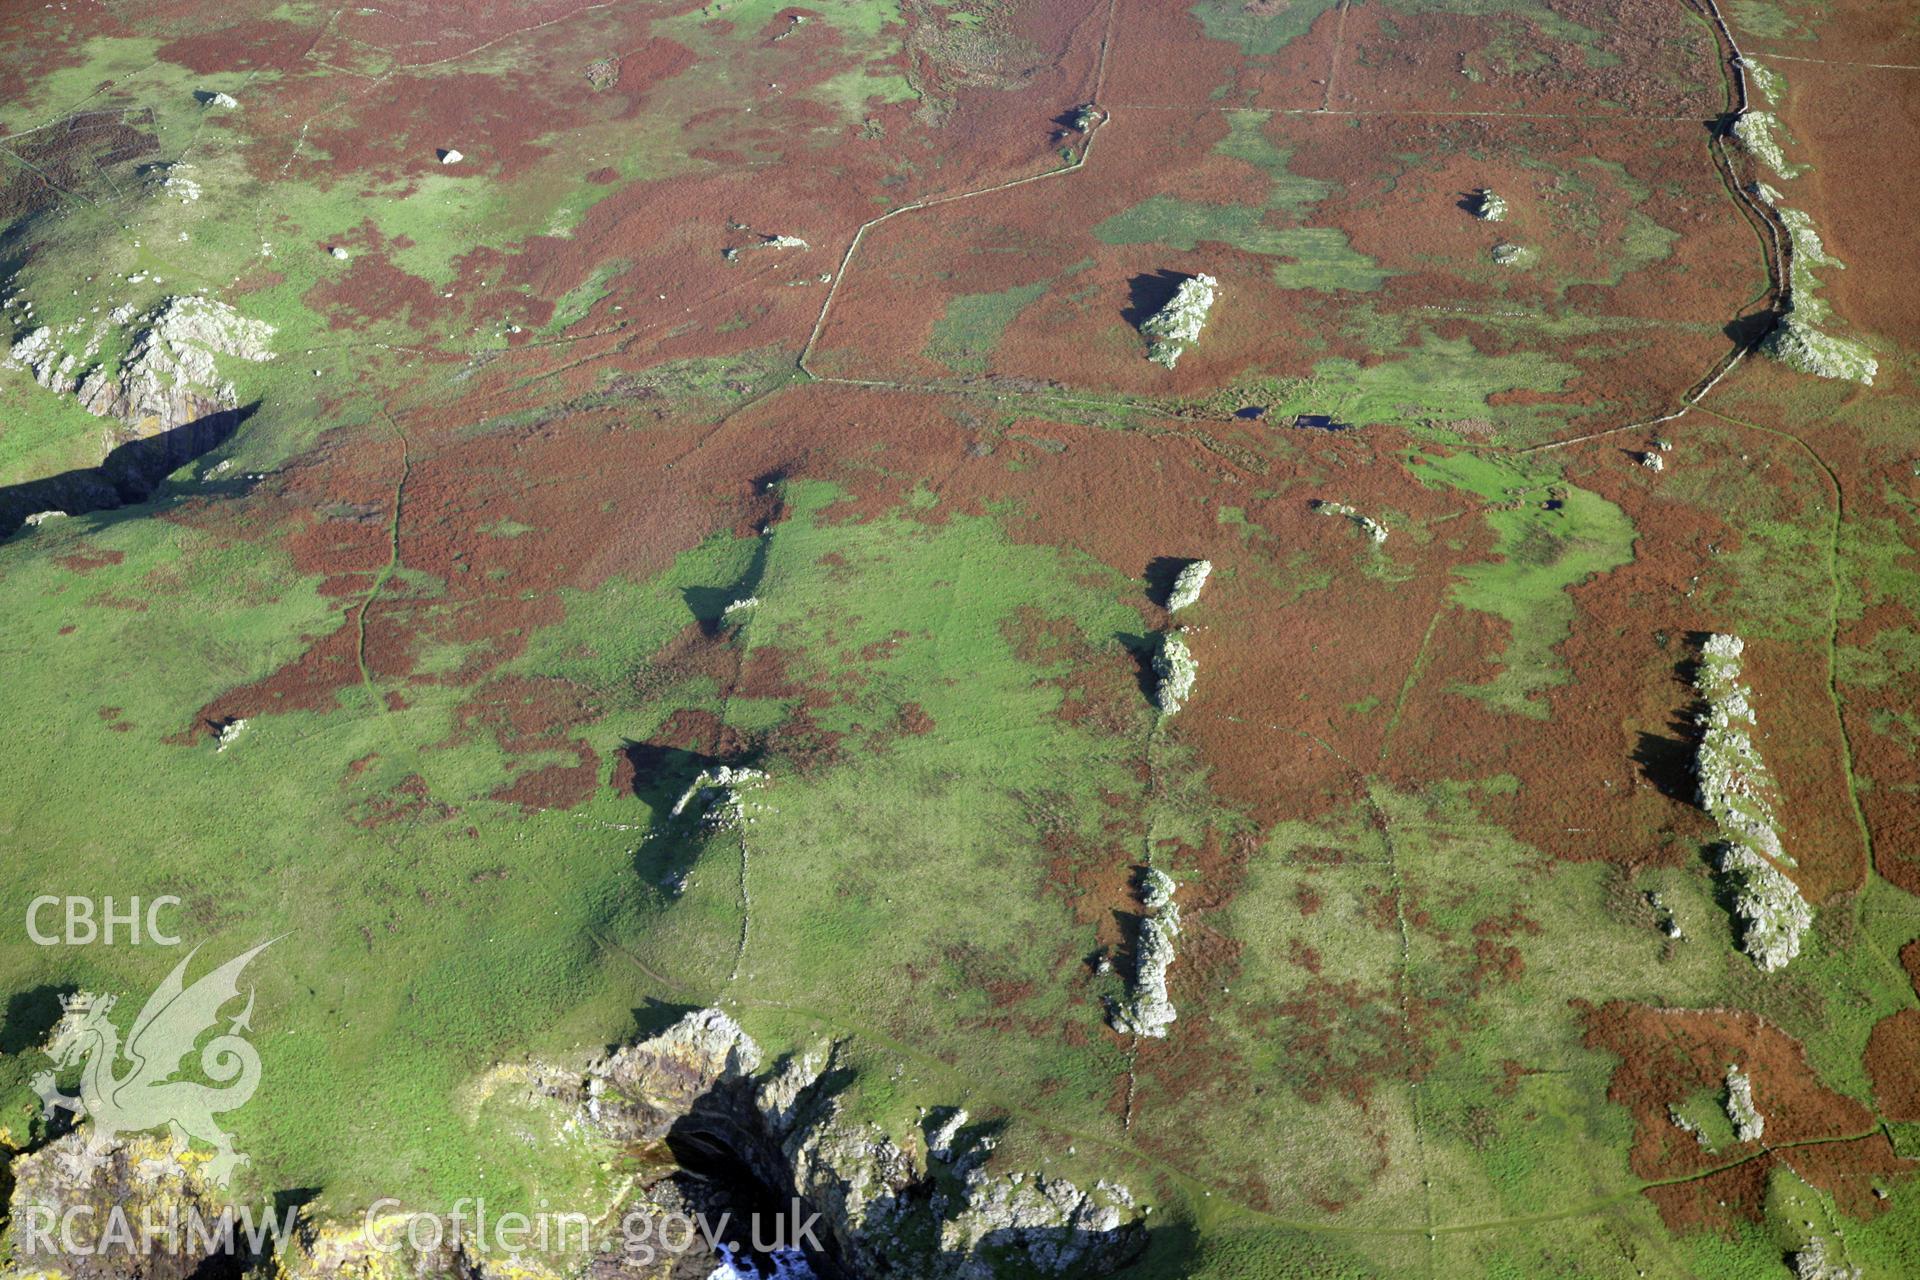 RCAHMW colour oblique photograph of settlements and field systems, Skomer Island, viewed from the west. Taken by O. Davies & T. Driver on 22/11/2013.